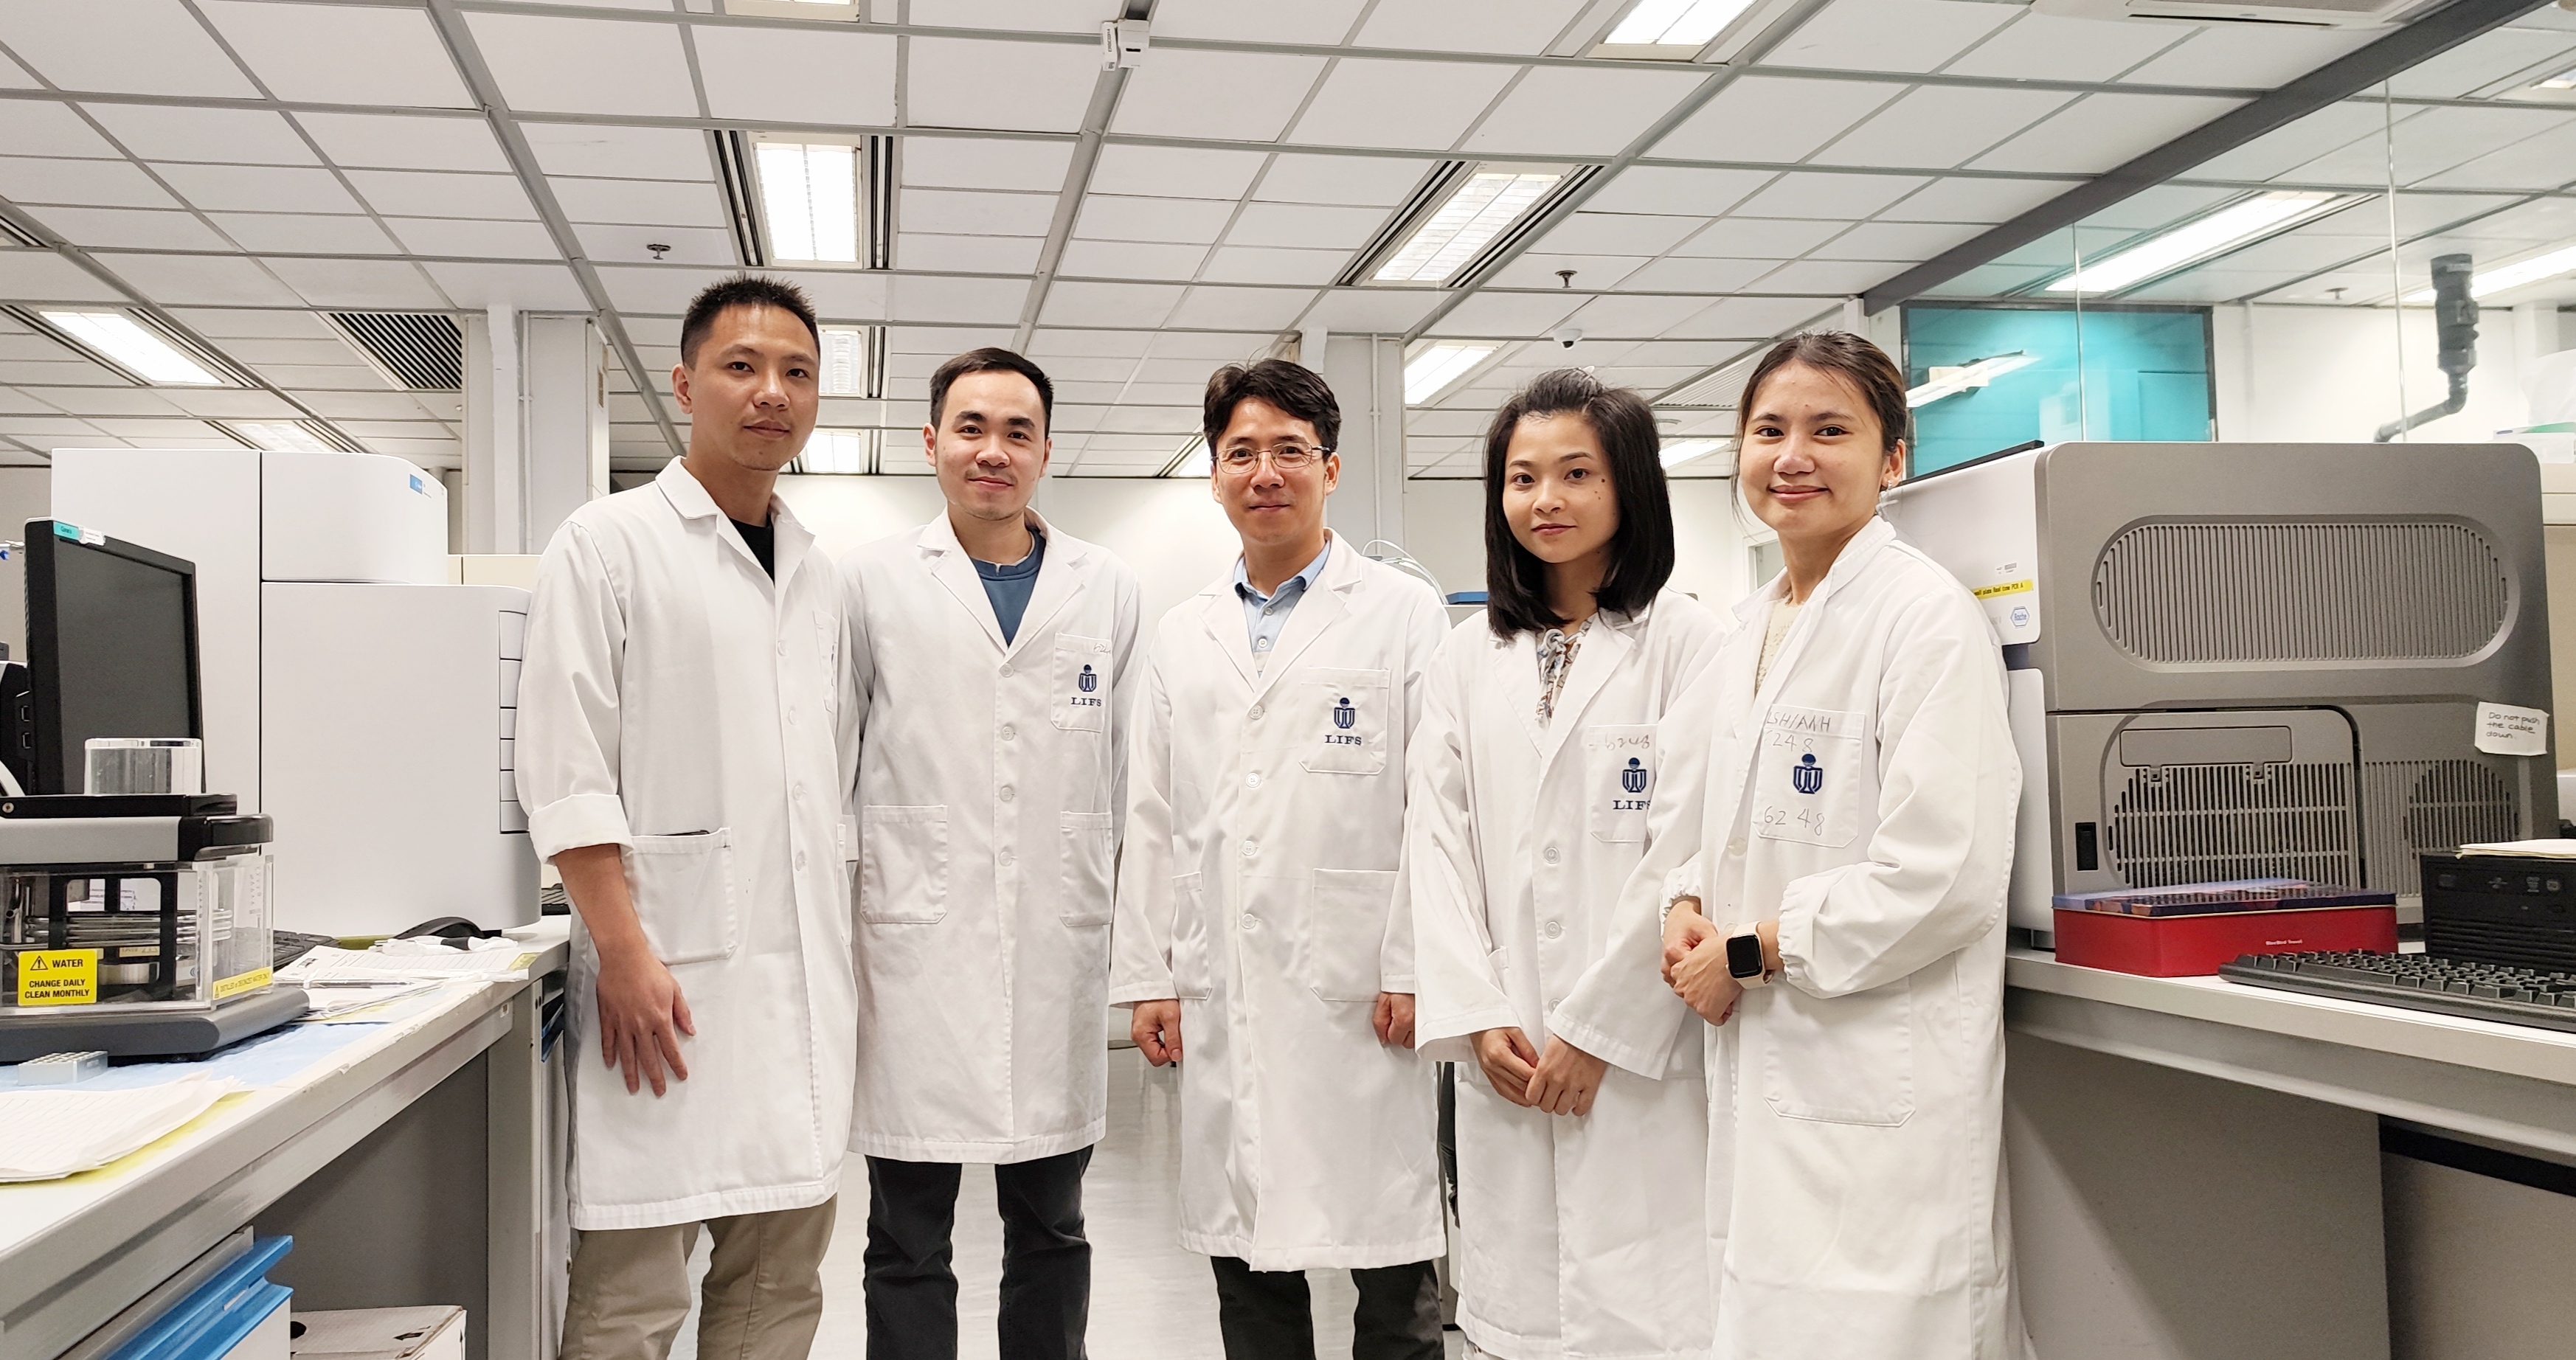 The authors of the published paper are, from left to right: Trung Duc Nguyen, Minh Khoa Ngo, Tuan Anh Nguyen (group leader), Thuy Linh Nguyen, and Thi Nhu-Y Le.